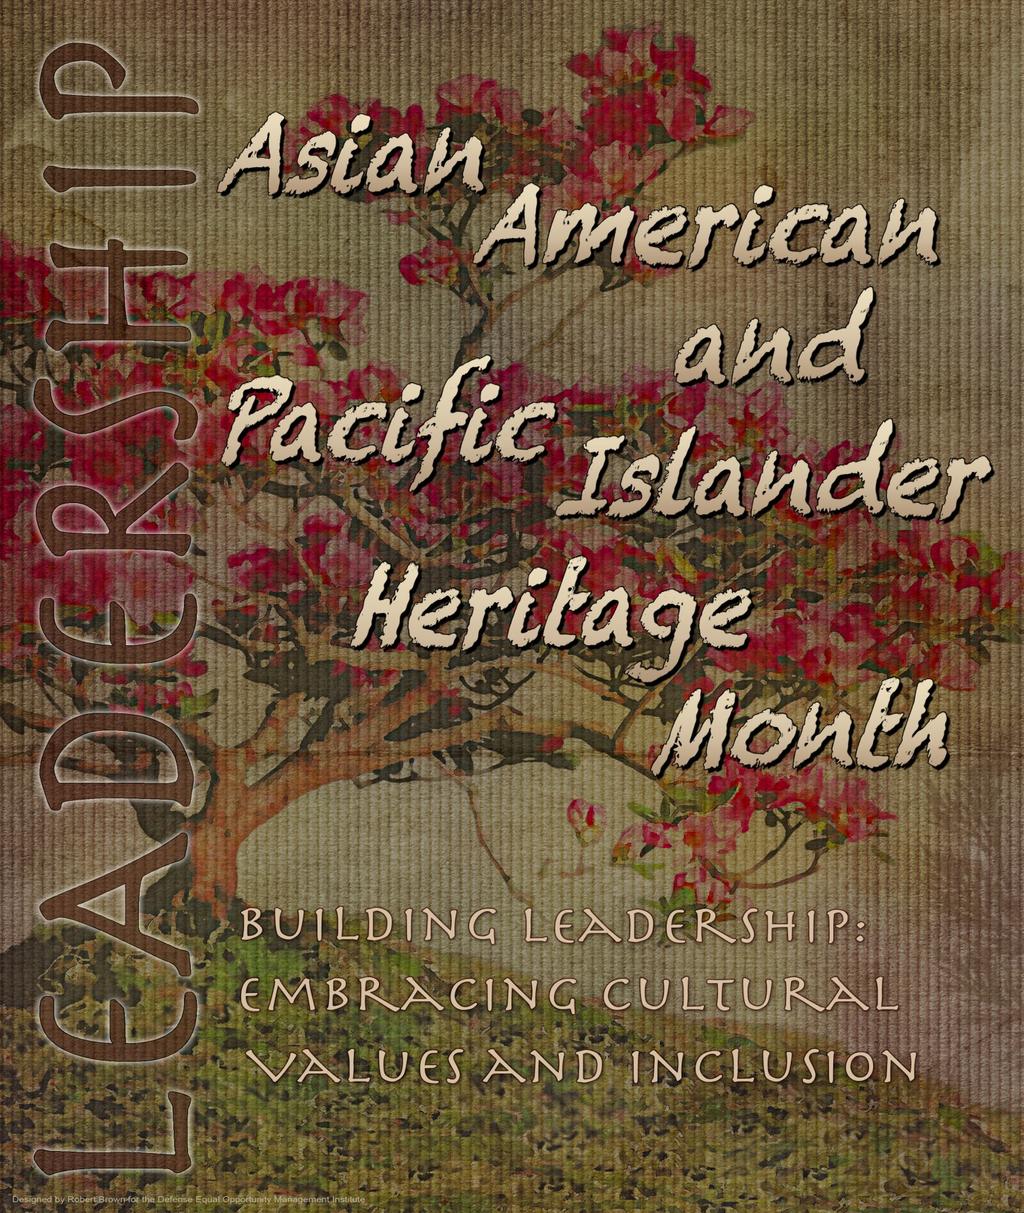 Vanguard Voice Volume 3, Issue 1 About Asian-Pacific American Heritage Month May is Asian-Pacific American Heritage Month a celebration of Asians and Pacific Islanders in the United States.